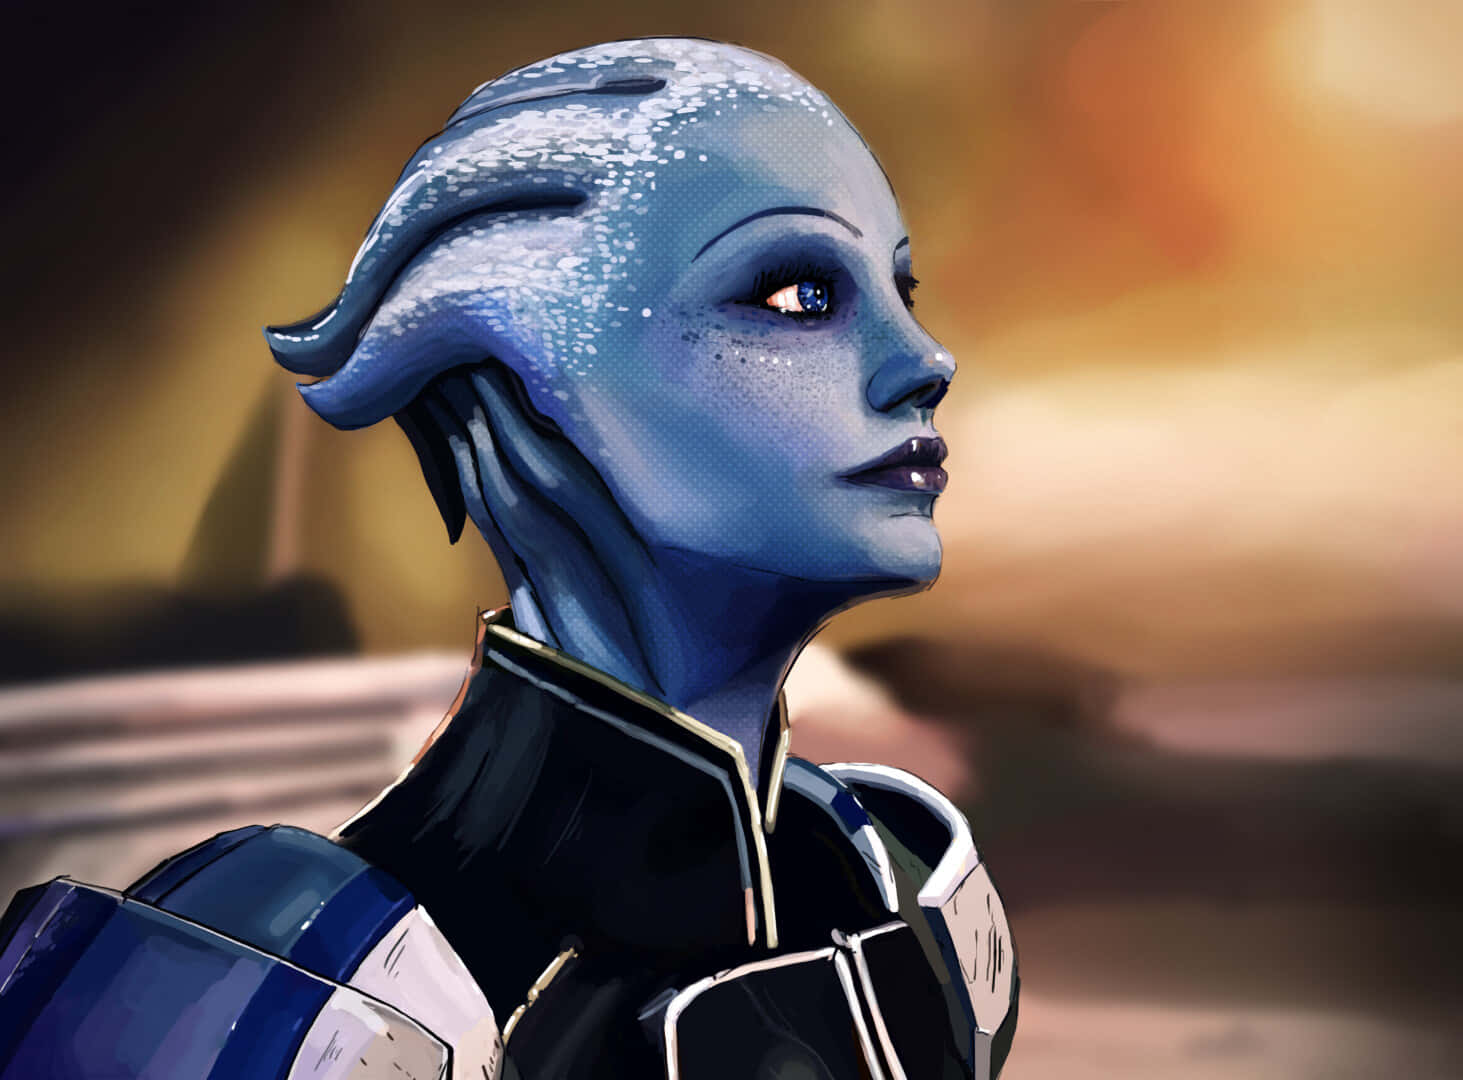 Liara T'soni in a Powerful Stance Wallpaper